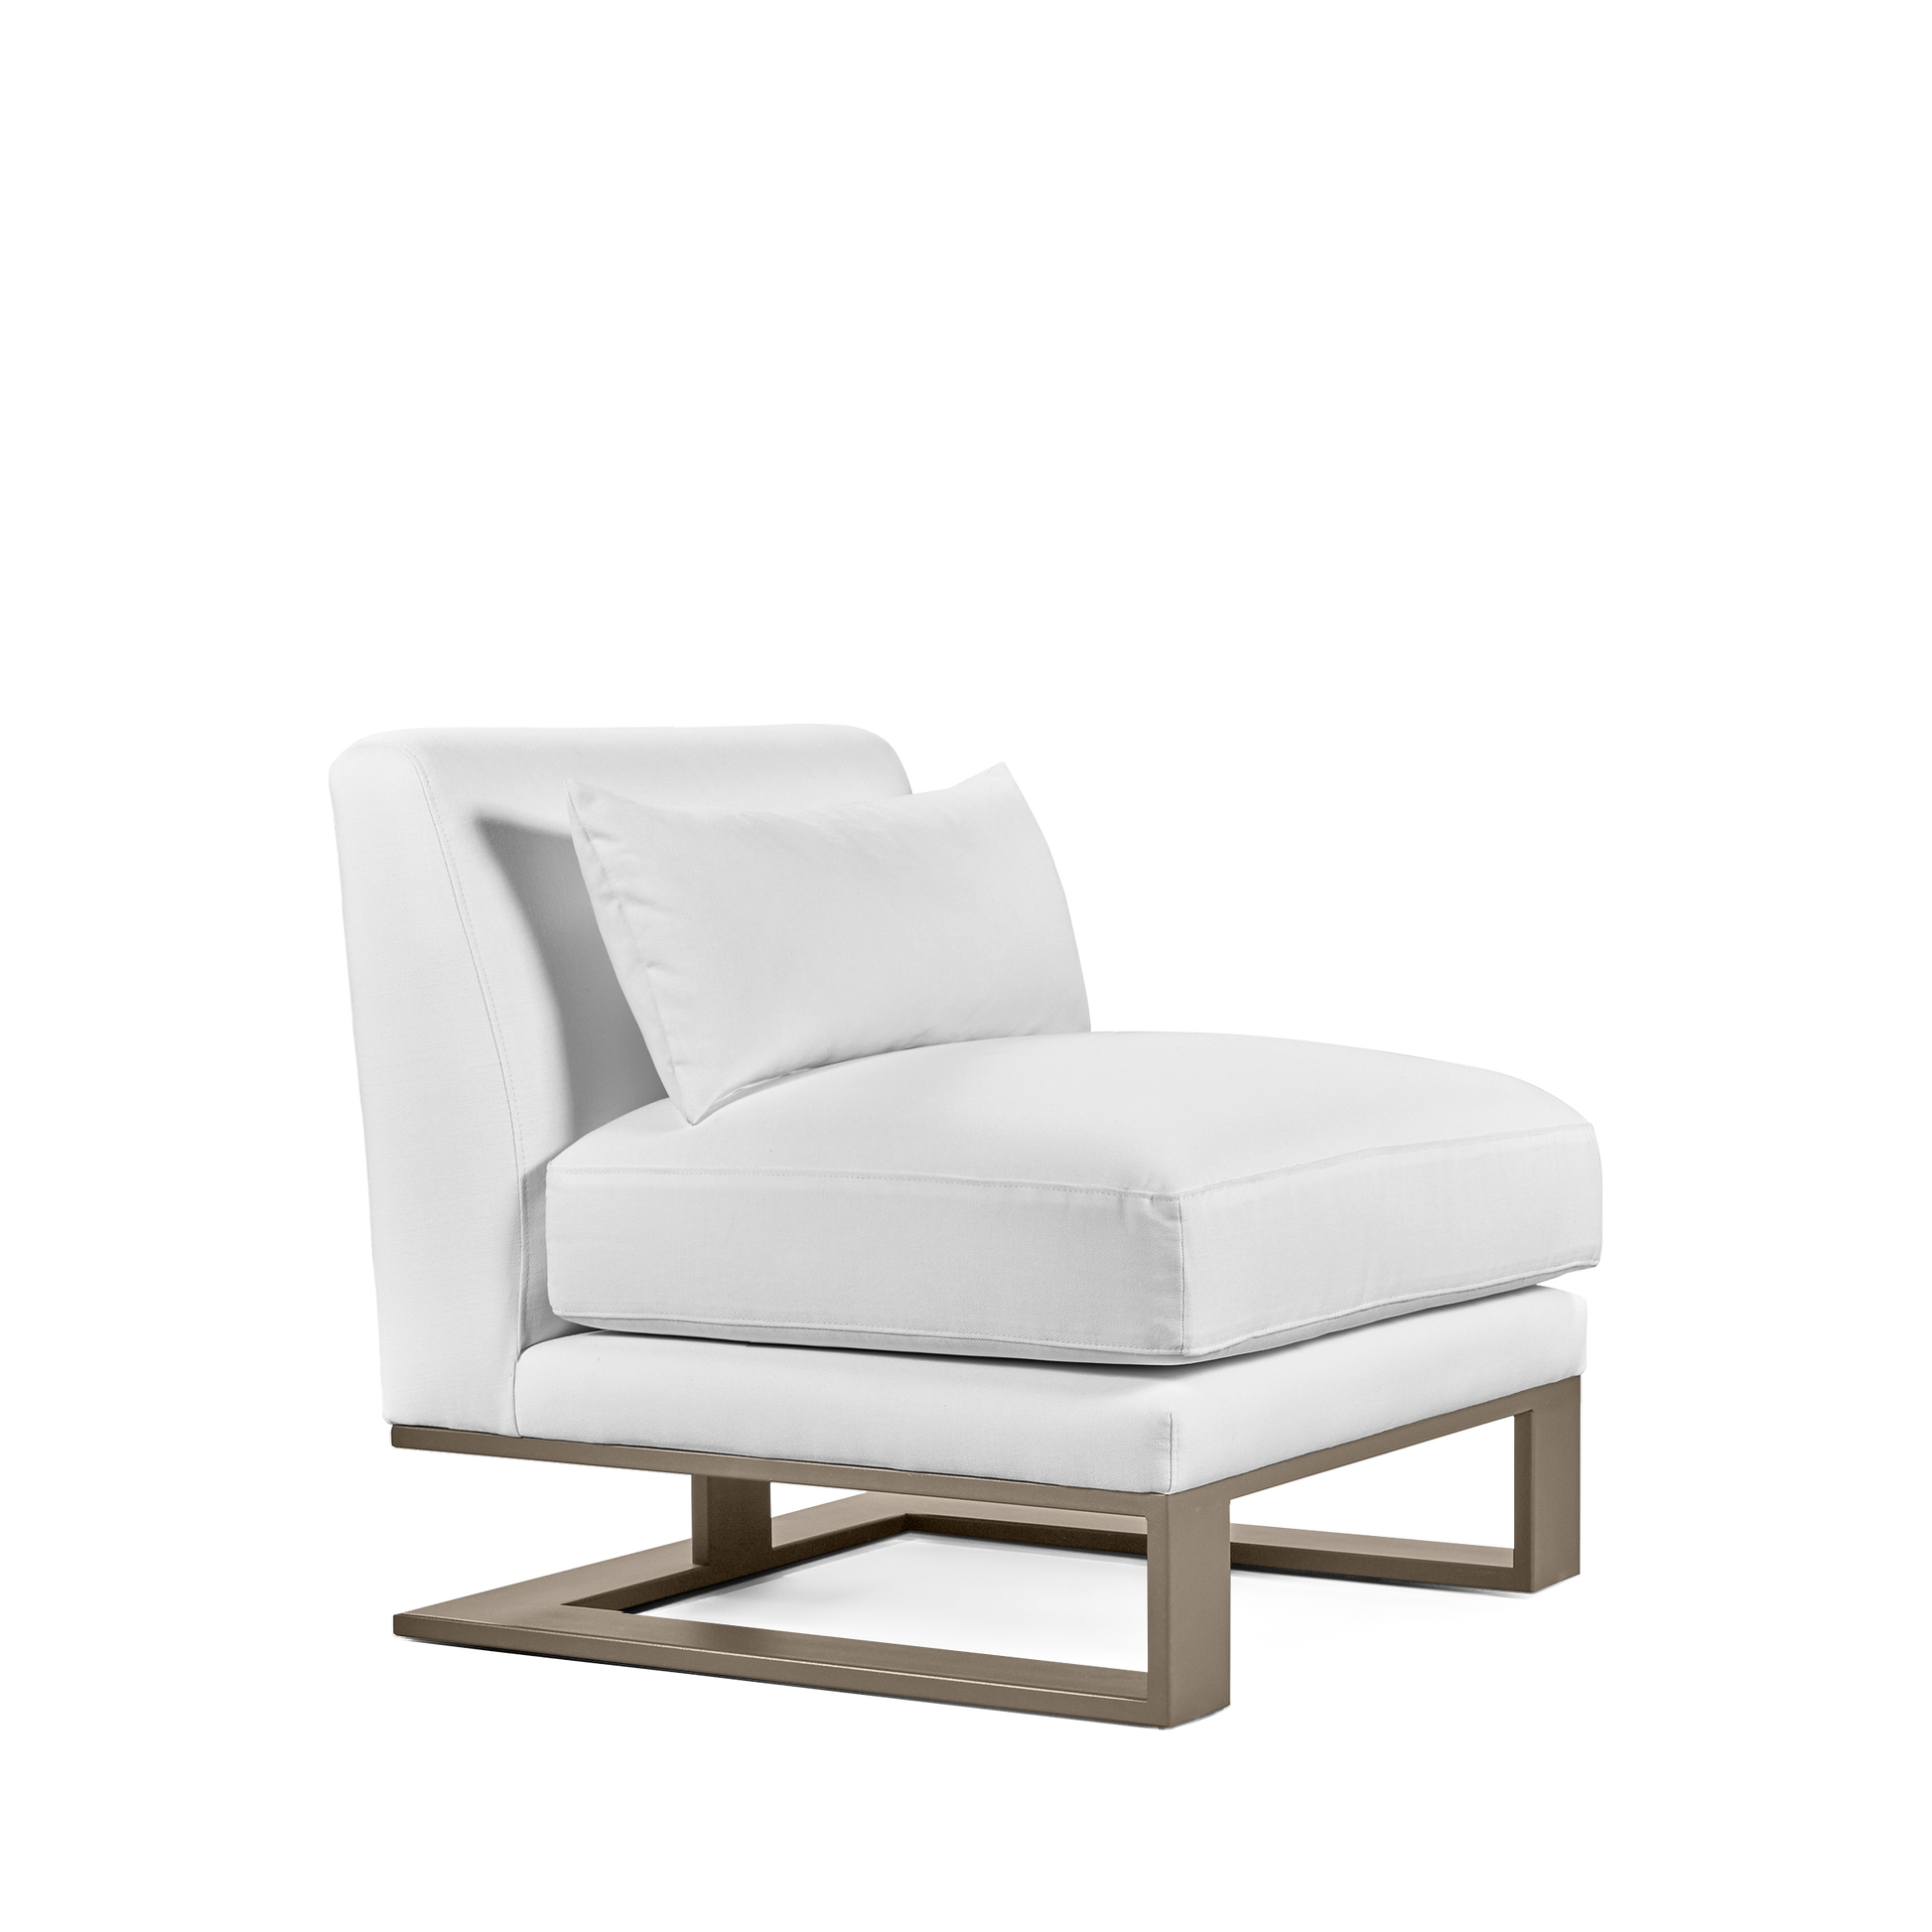 Alpes armchair with white textile and champagne colored wood legs